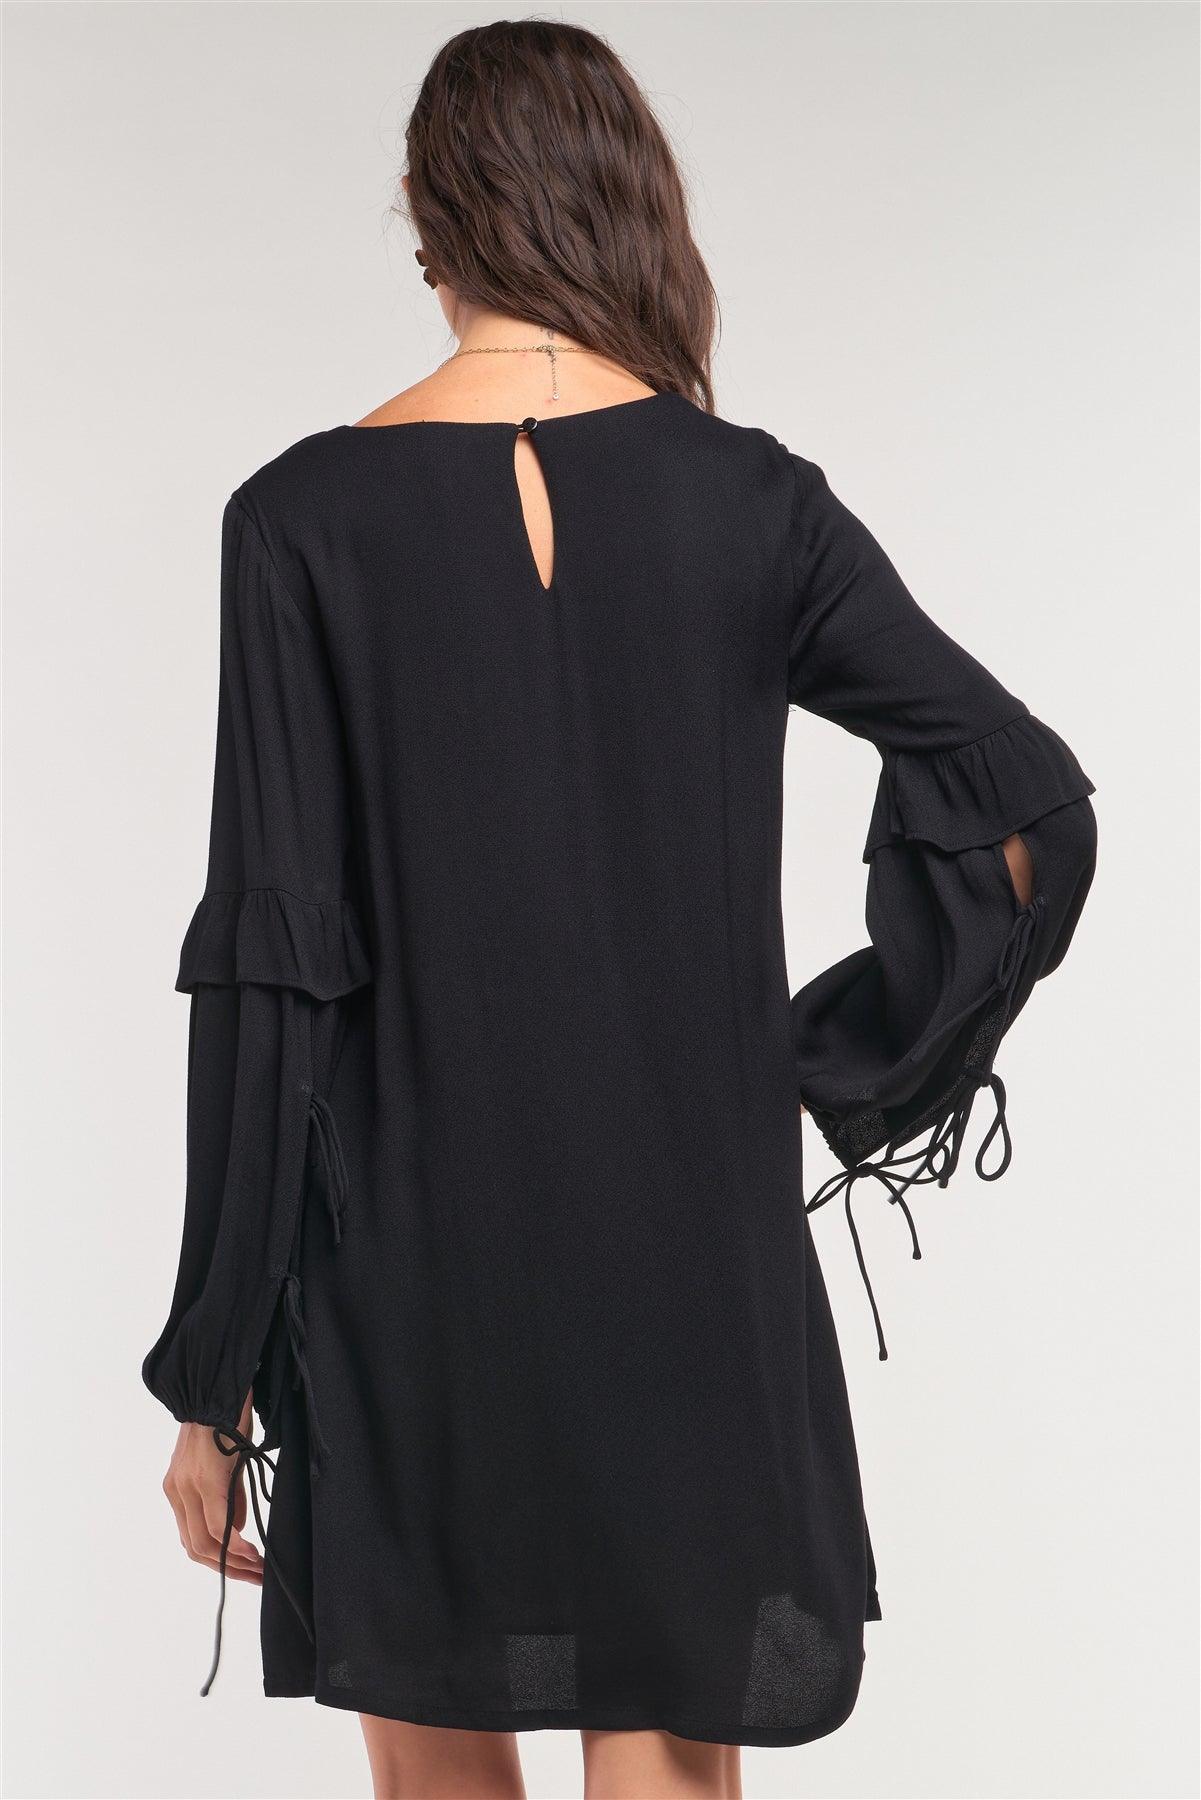 Black Relaxed Fit Crew Neck Long Frill Slit Self-Tie Sleeve Detail Mini Dress /1-2-2-1